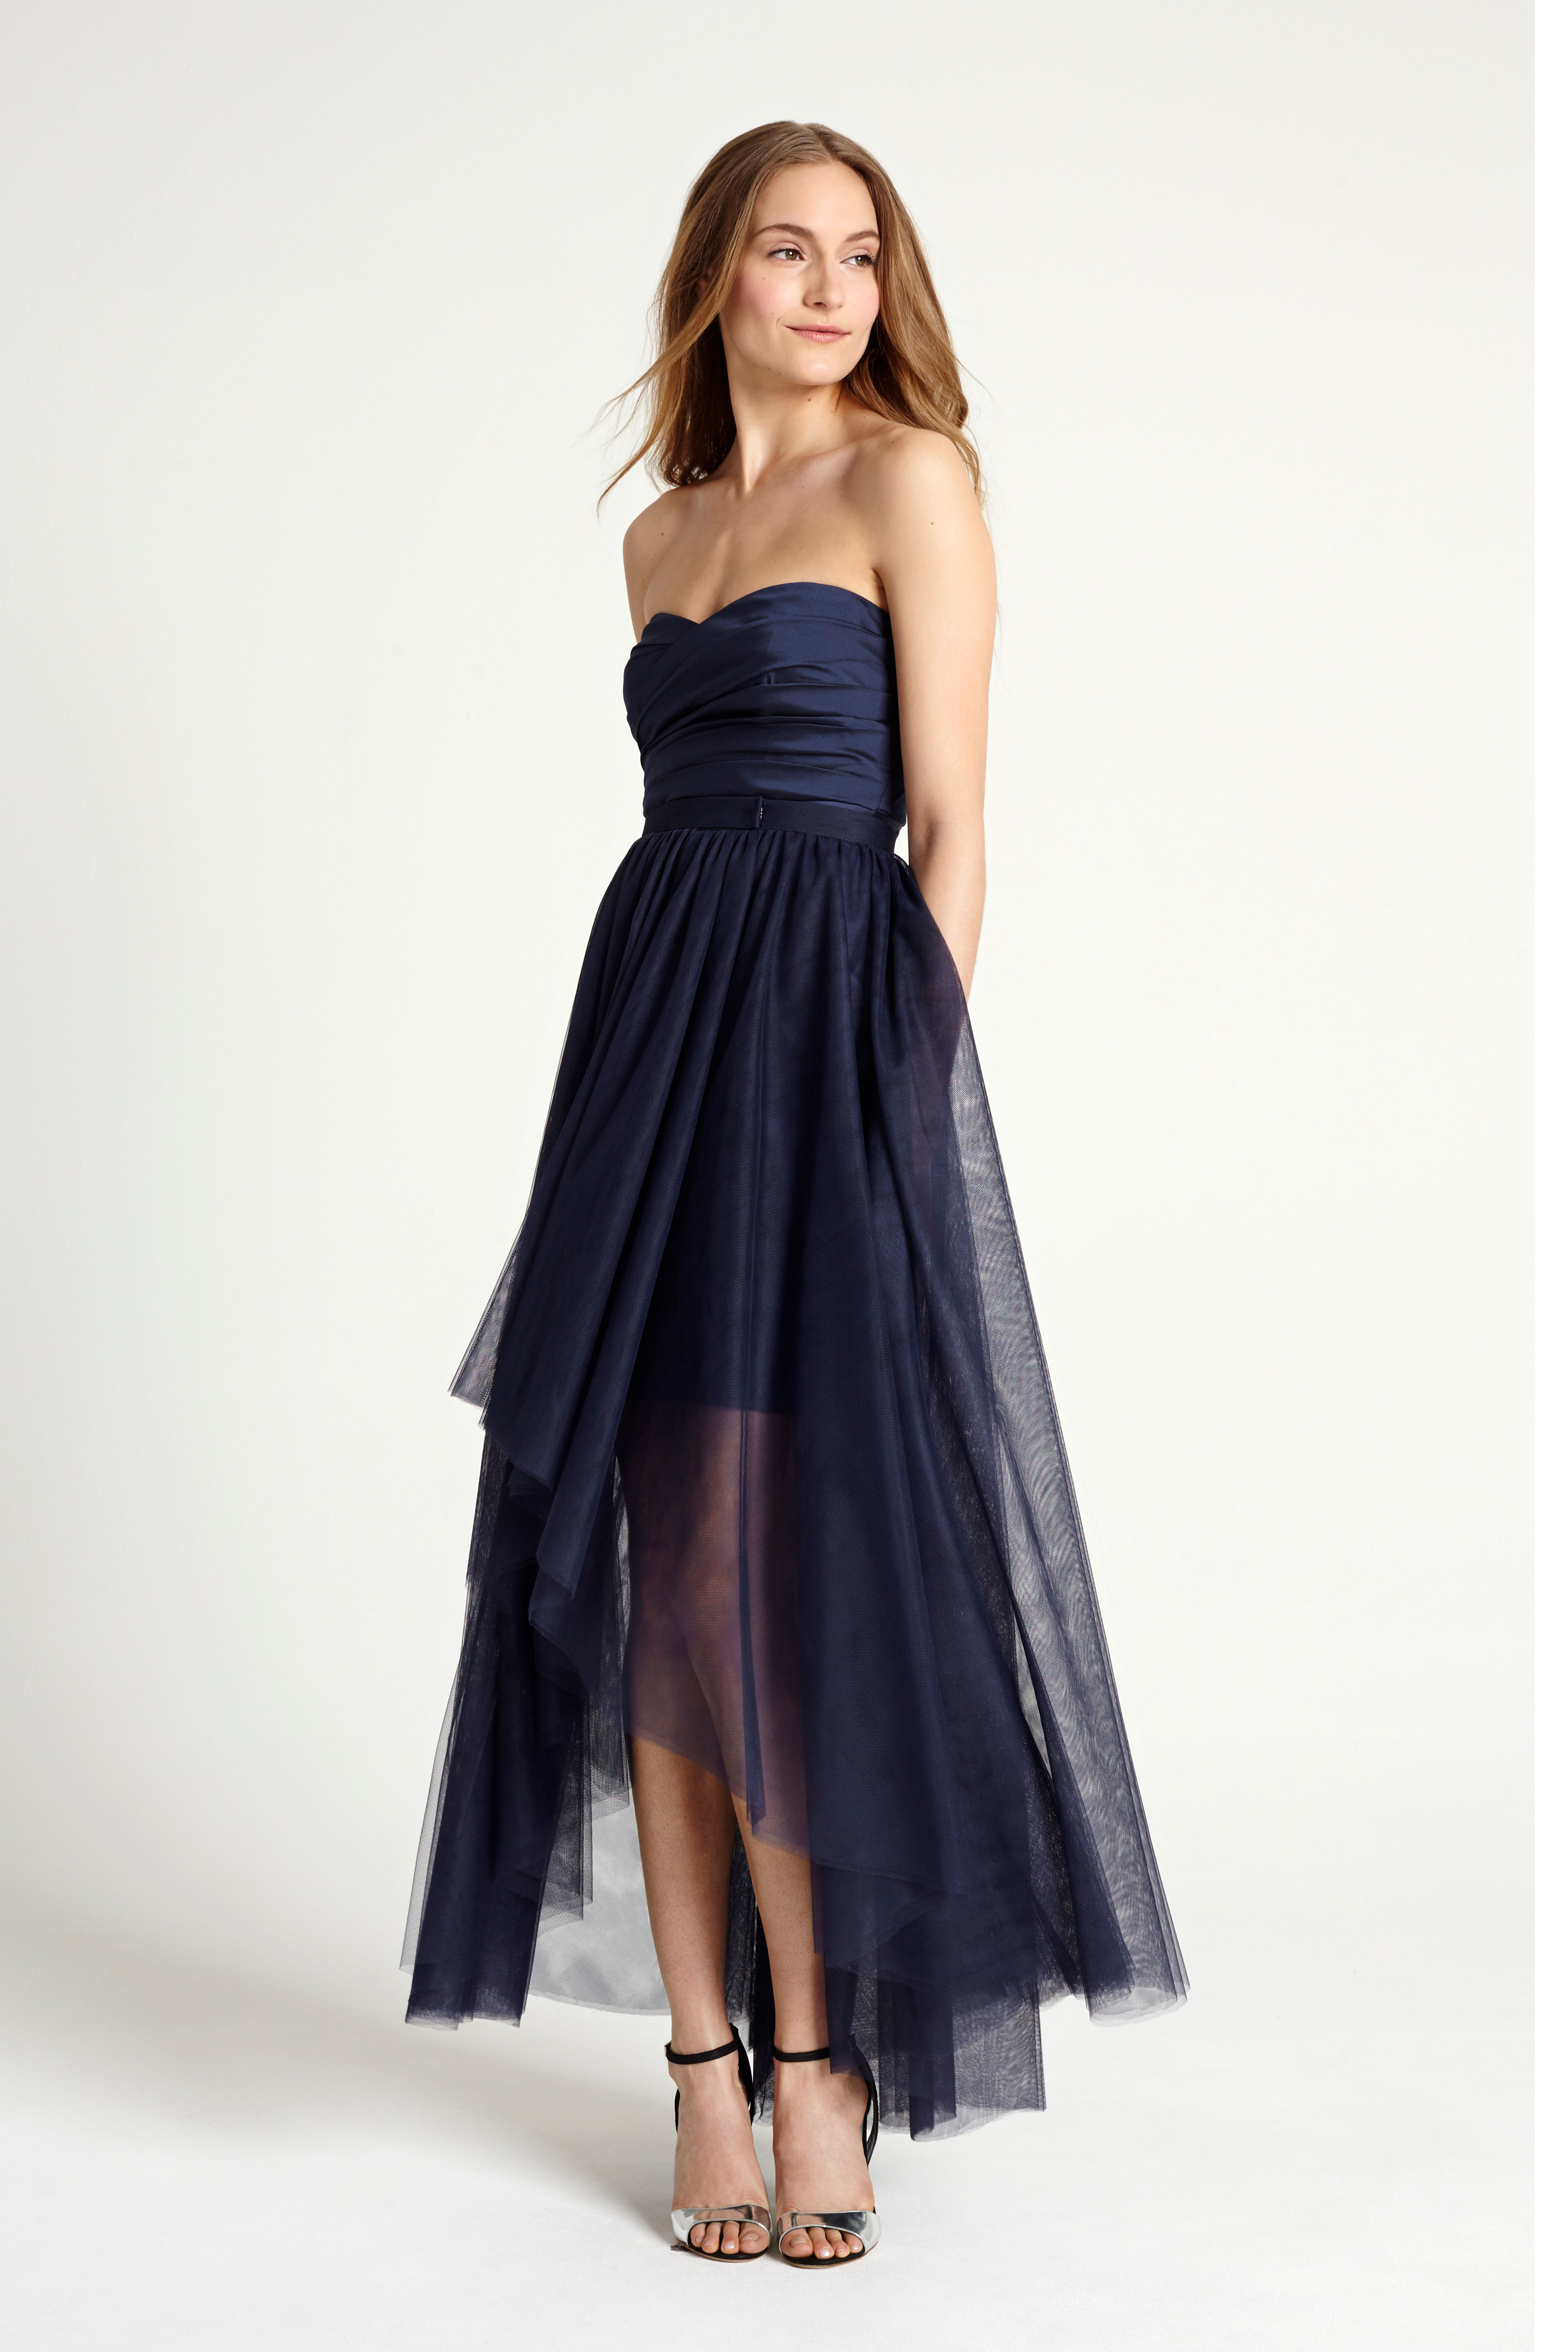 Blue note: A sassy deep blue strapless mini with overskirt by Monique Lhuillier